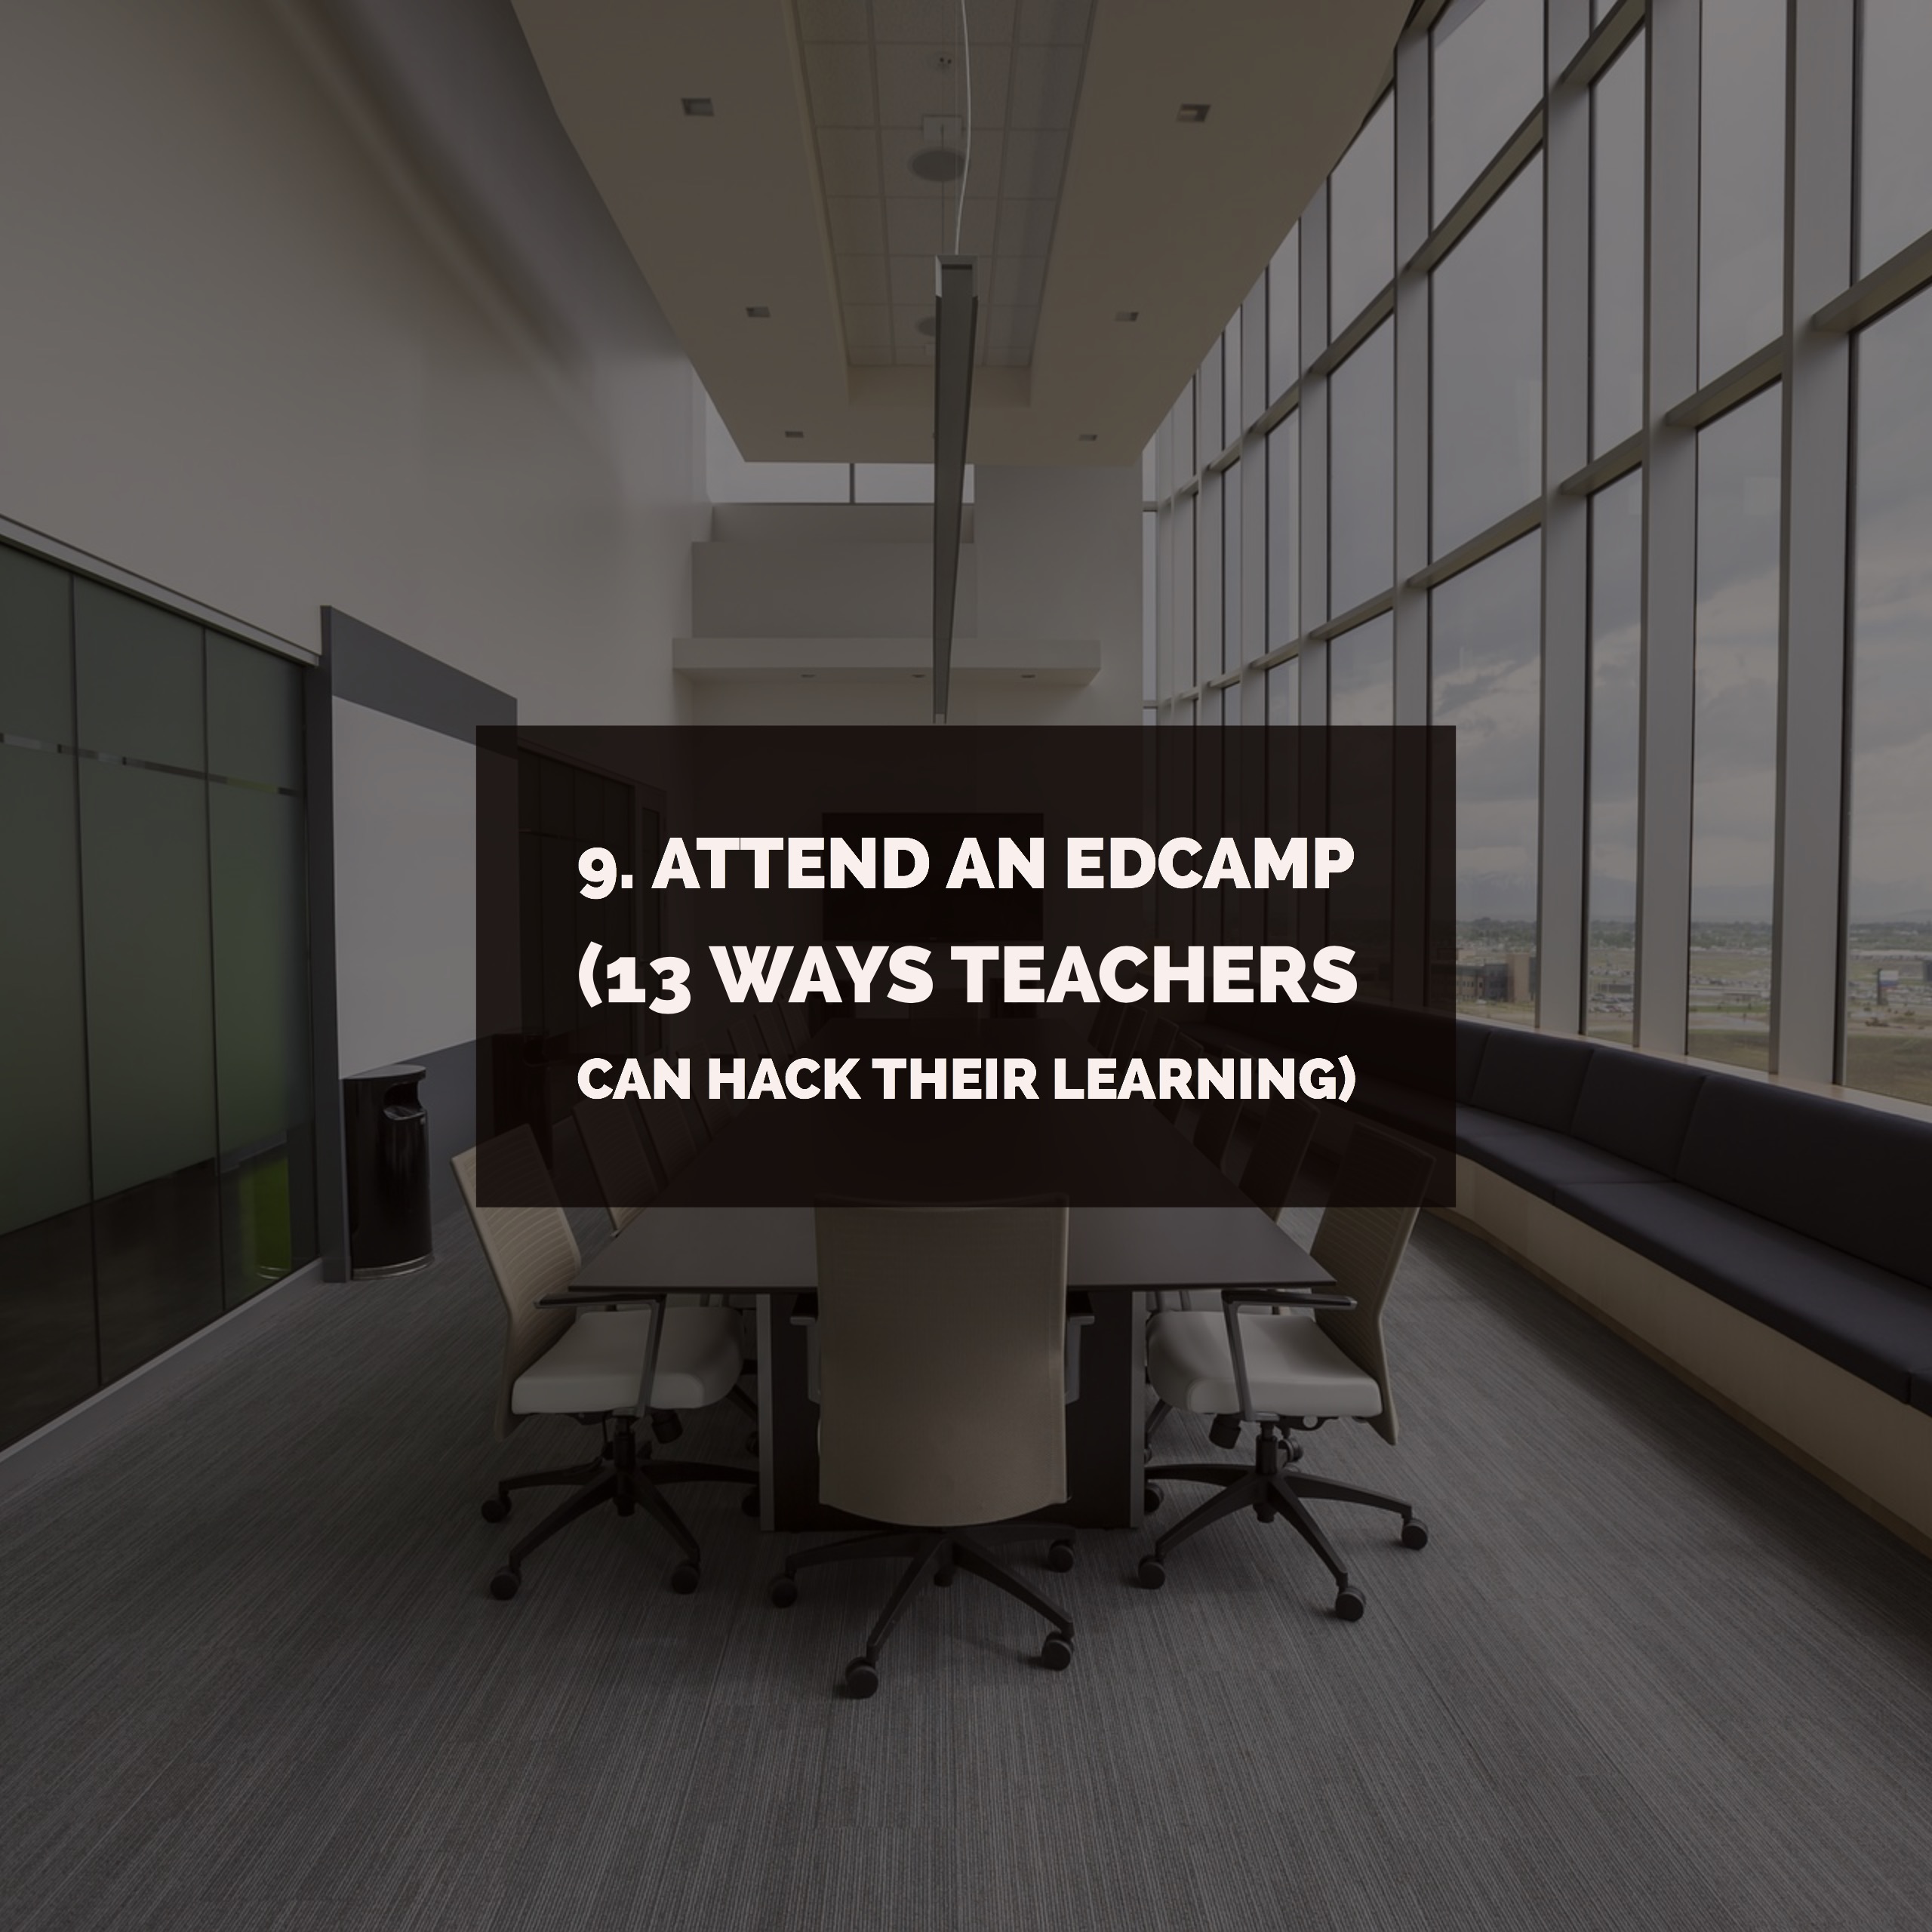 9. Attend an Edcamp (13 Ways Teachers Can Hack Their Learning)